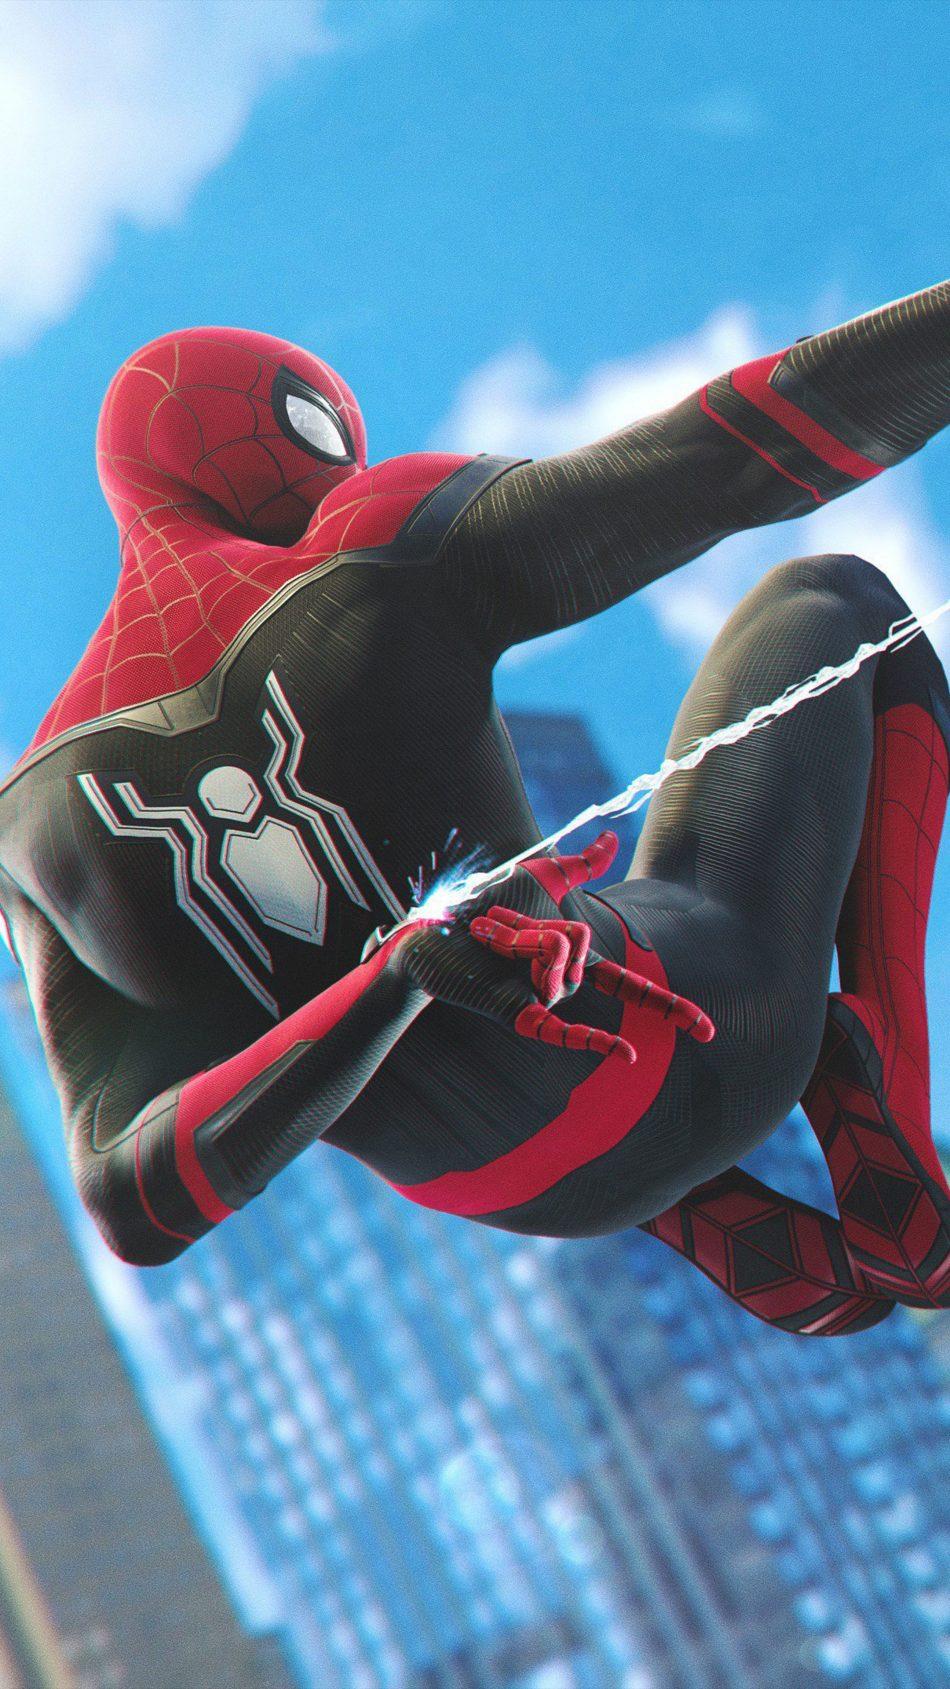 Spider Man Far From Home PS4 Free 4K Ultra HD Mobile Wallpaper